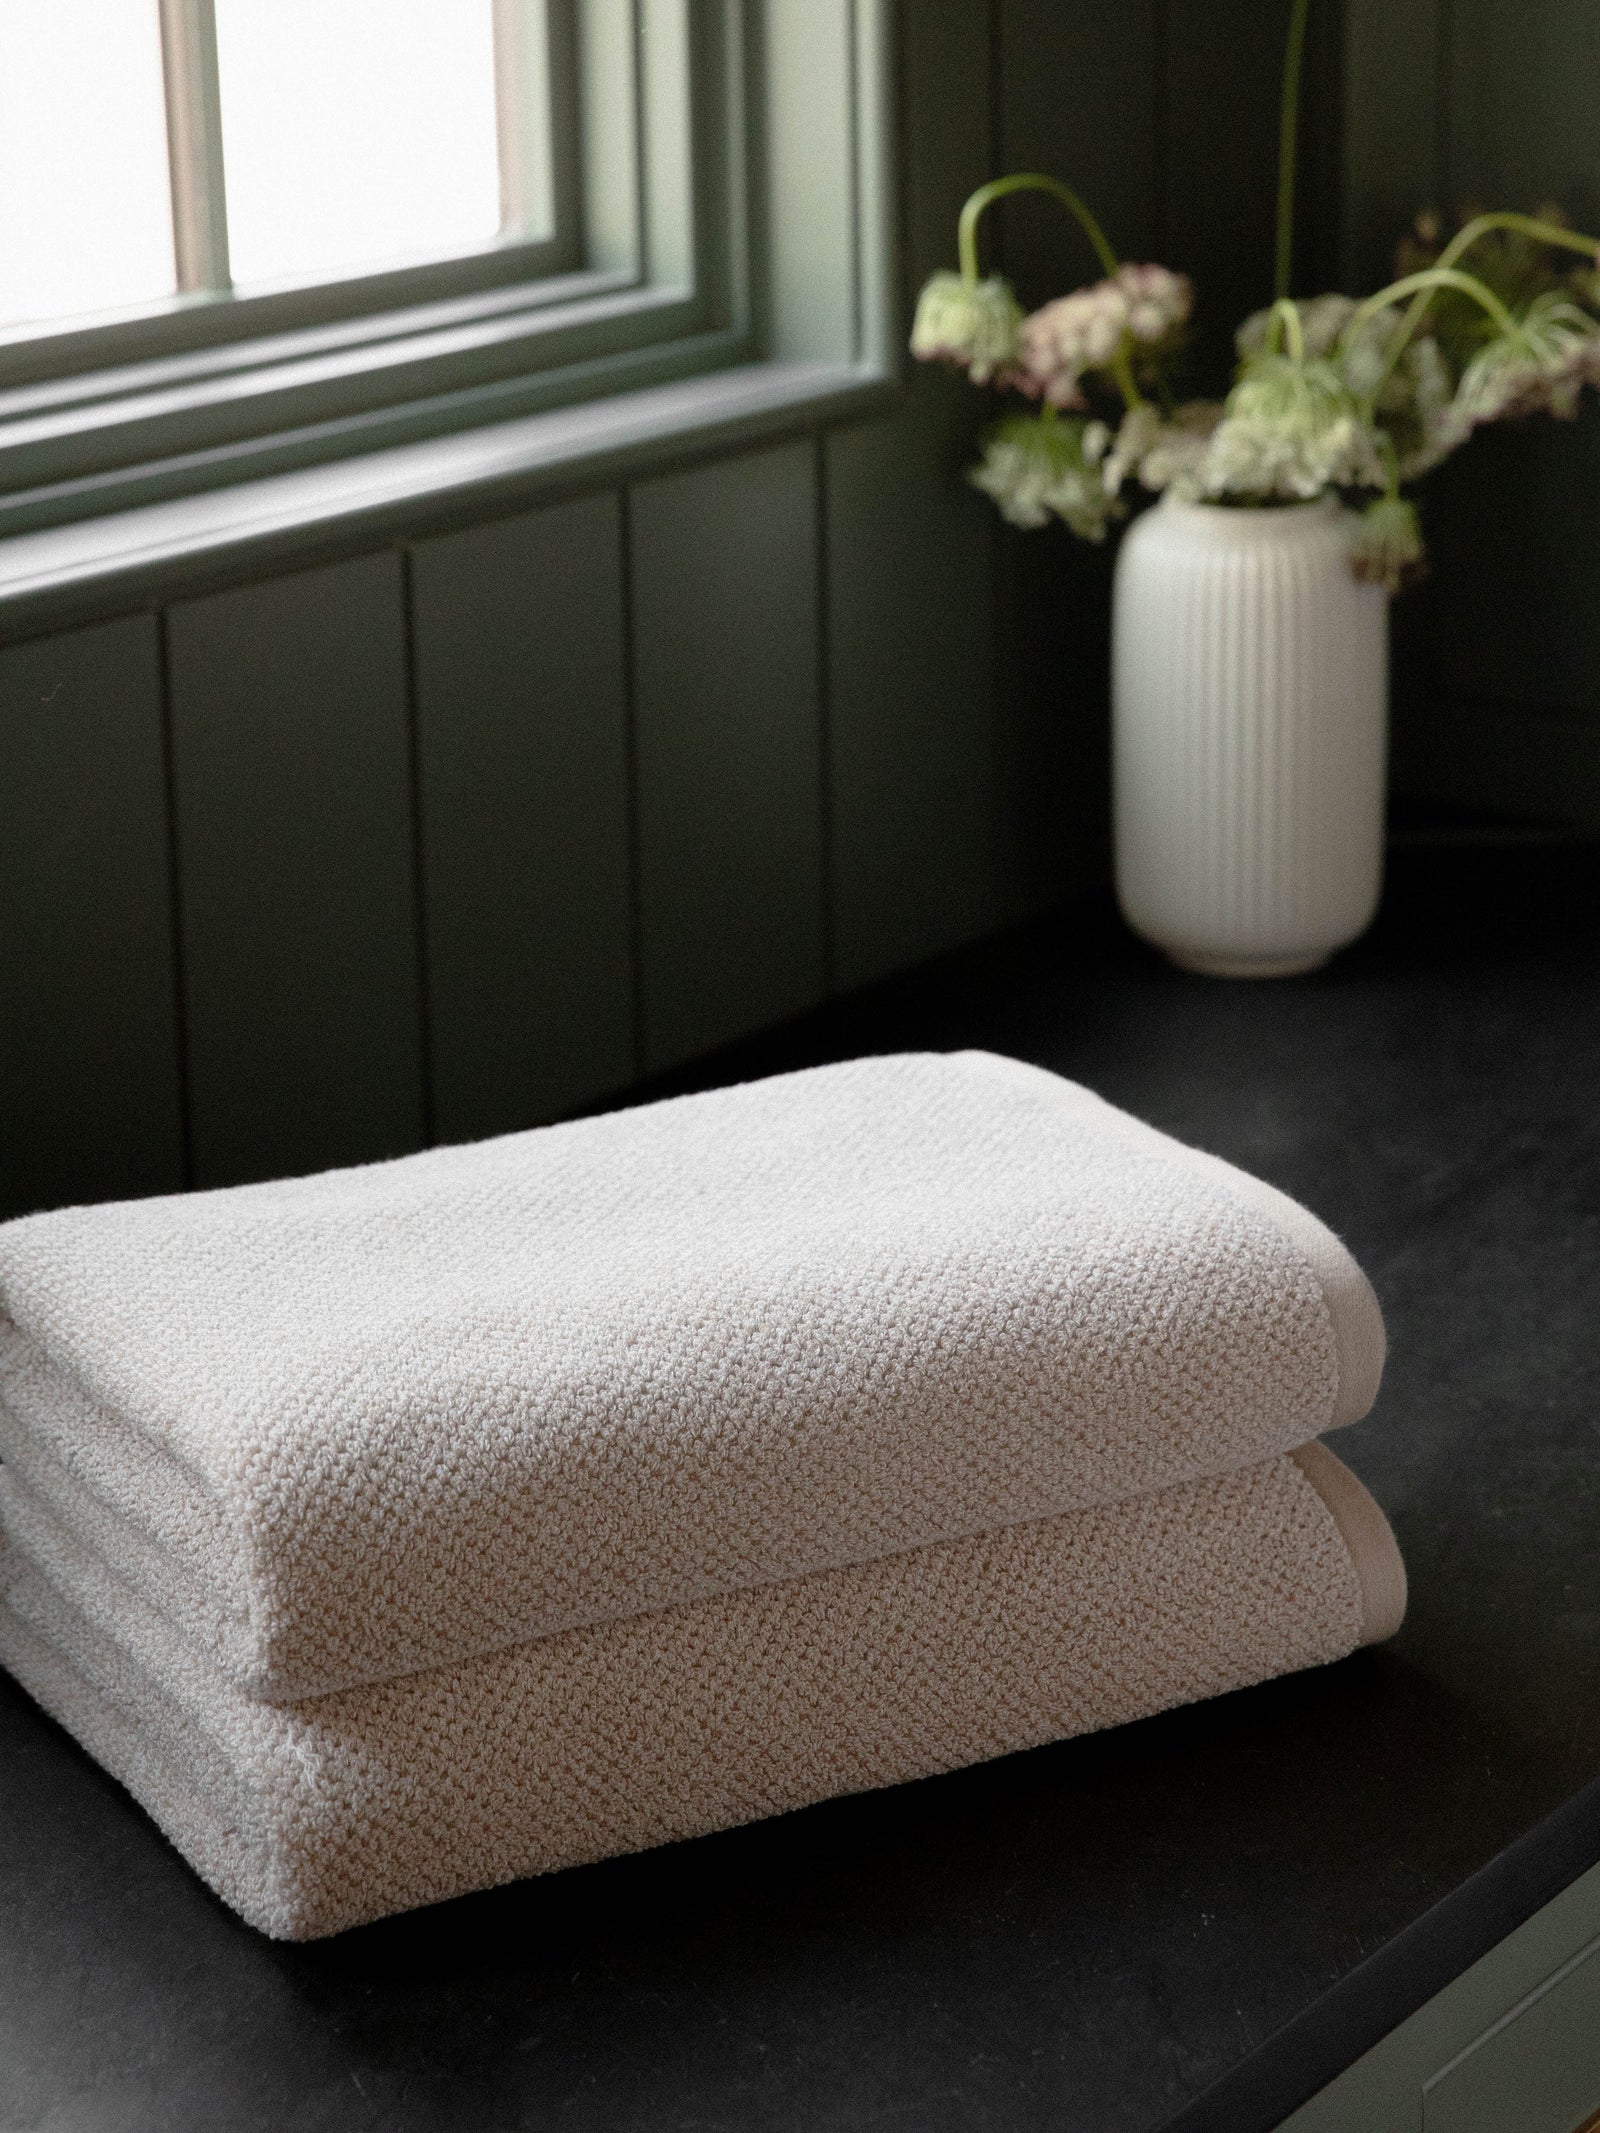 Nantucket Bath Towels in the color Heathered Sand. Photo of Nantucket Bath Towels taken with the bath towels resting on a countertop in a bathroom. 